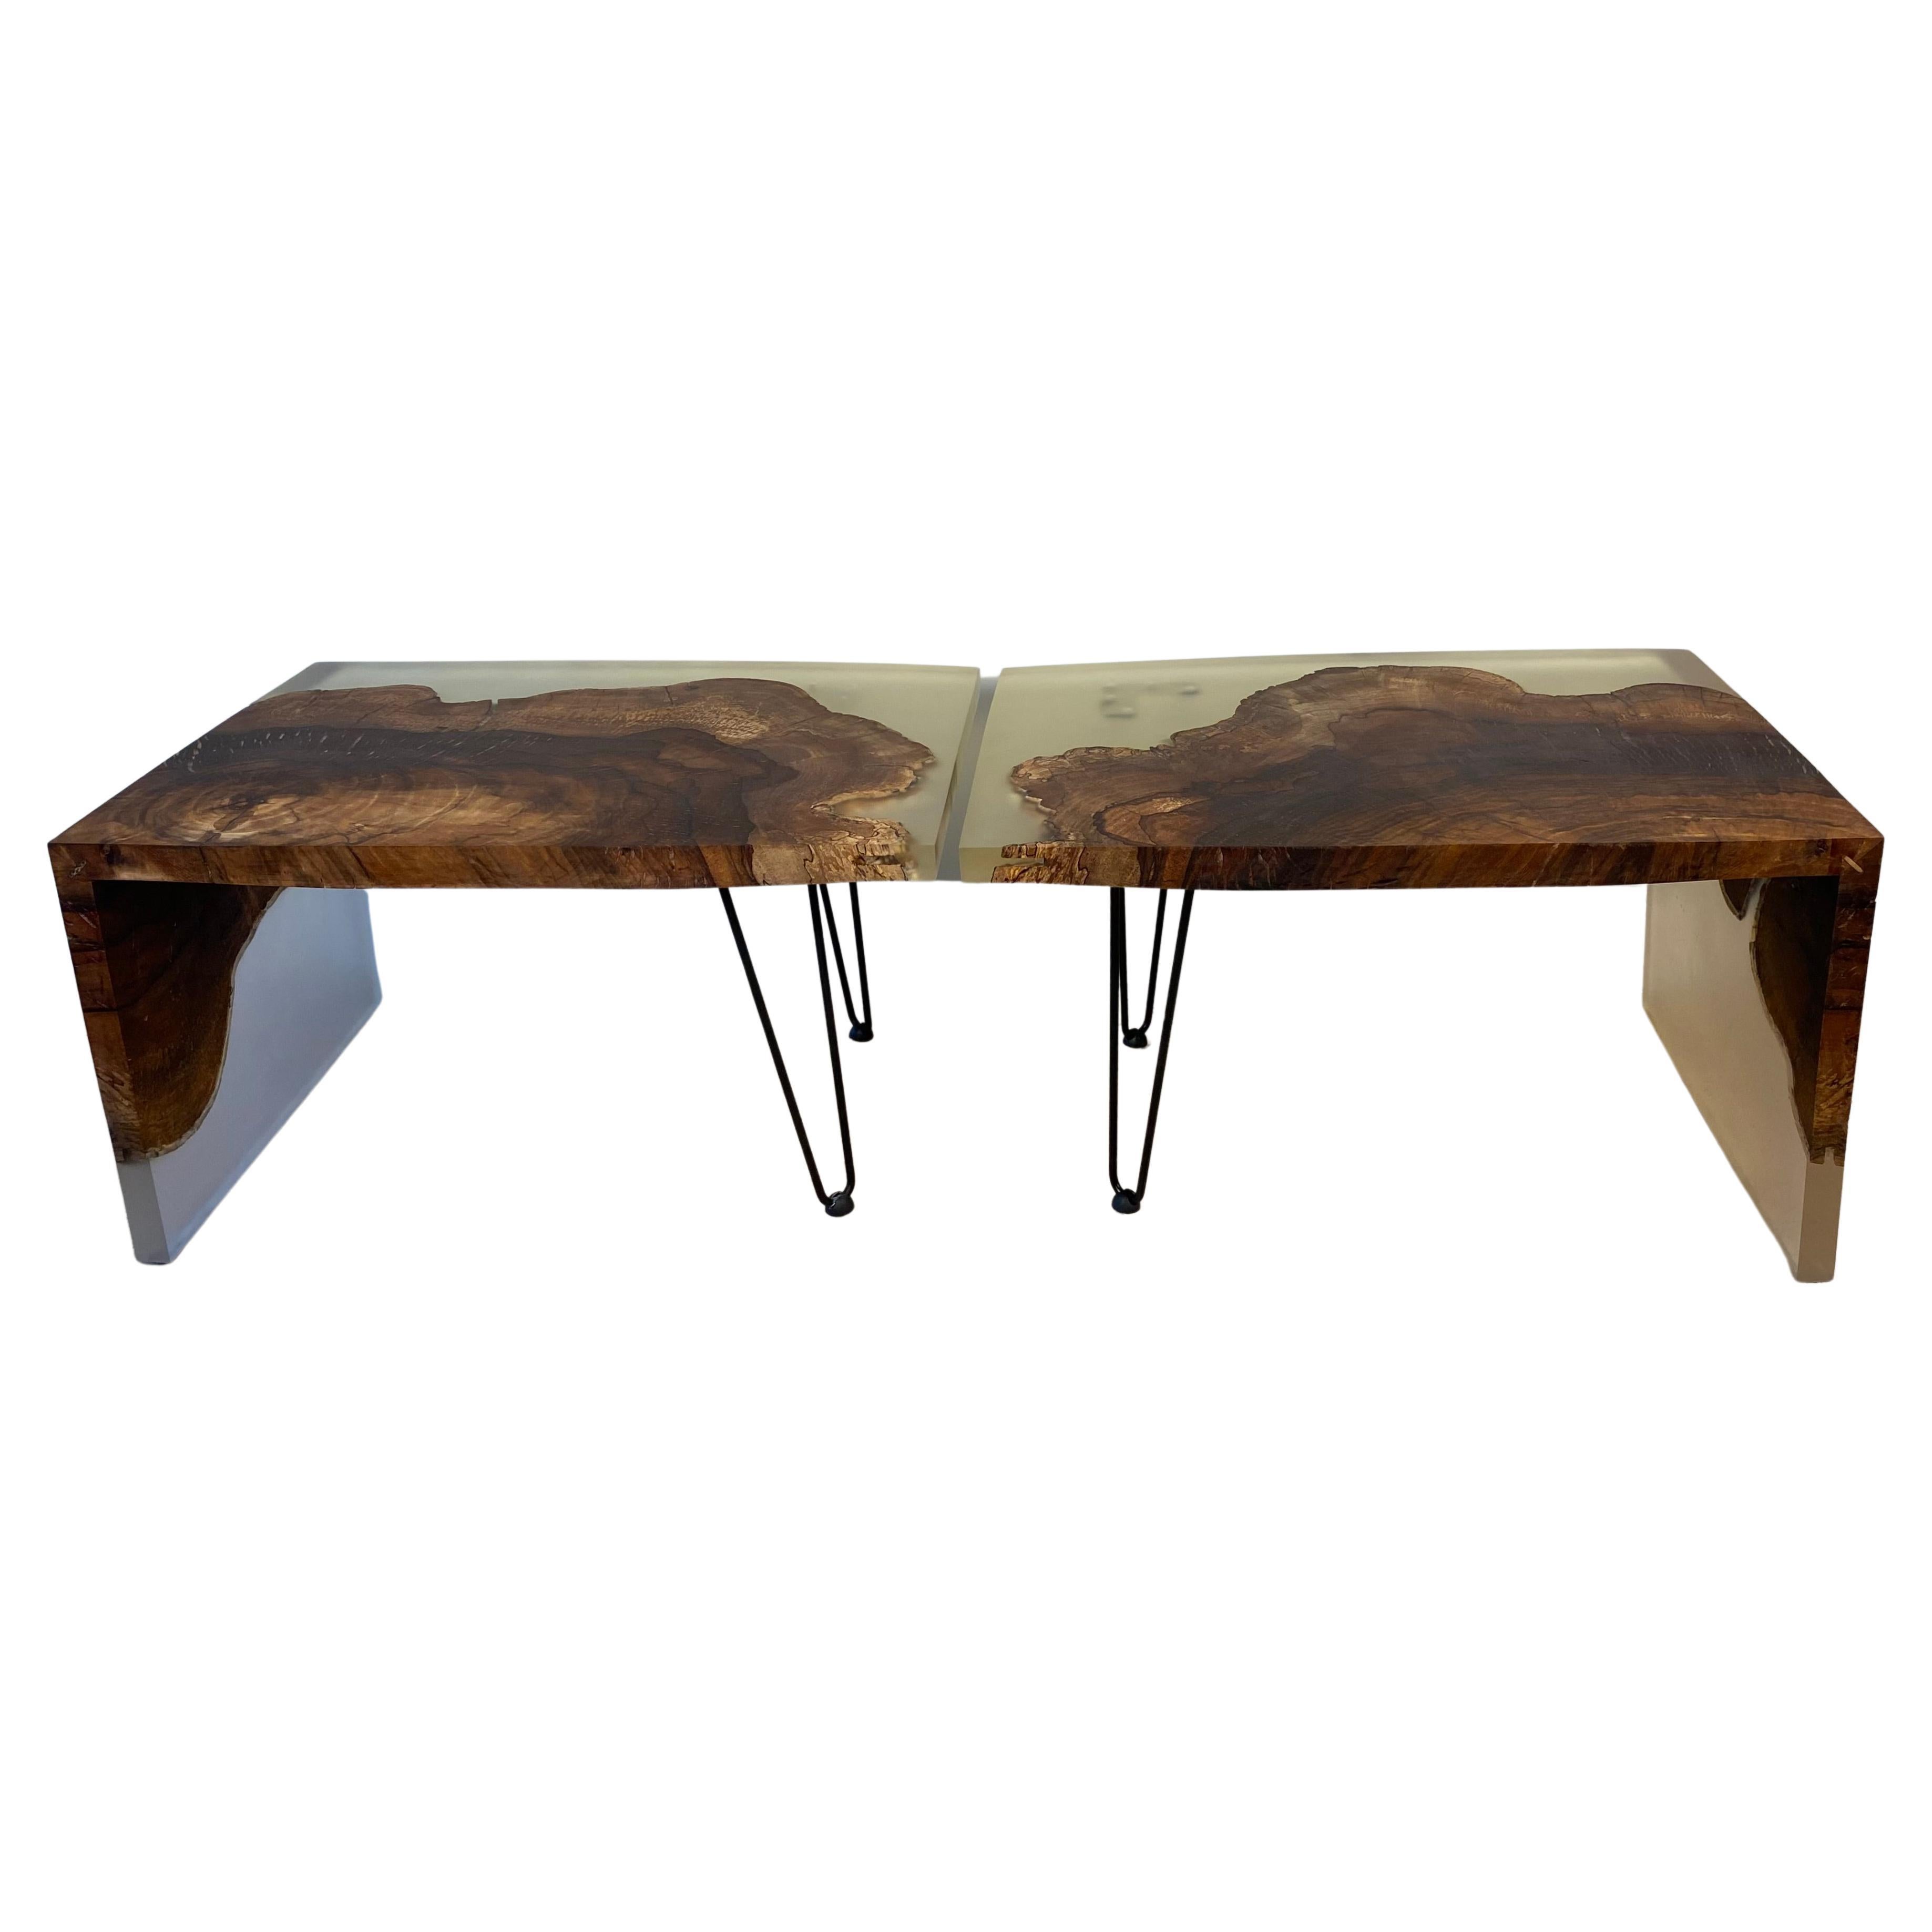 A Pair of Mid Century End Tables or Cantilevered Coffee Table